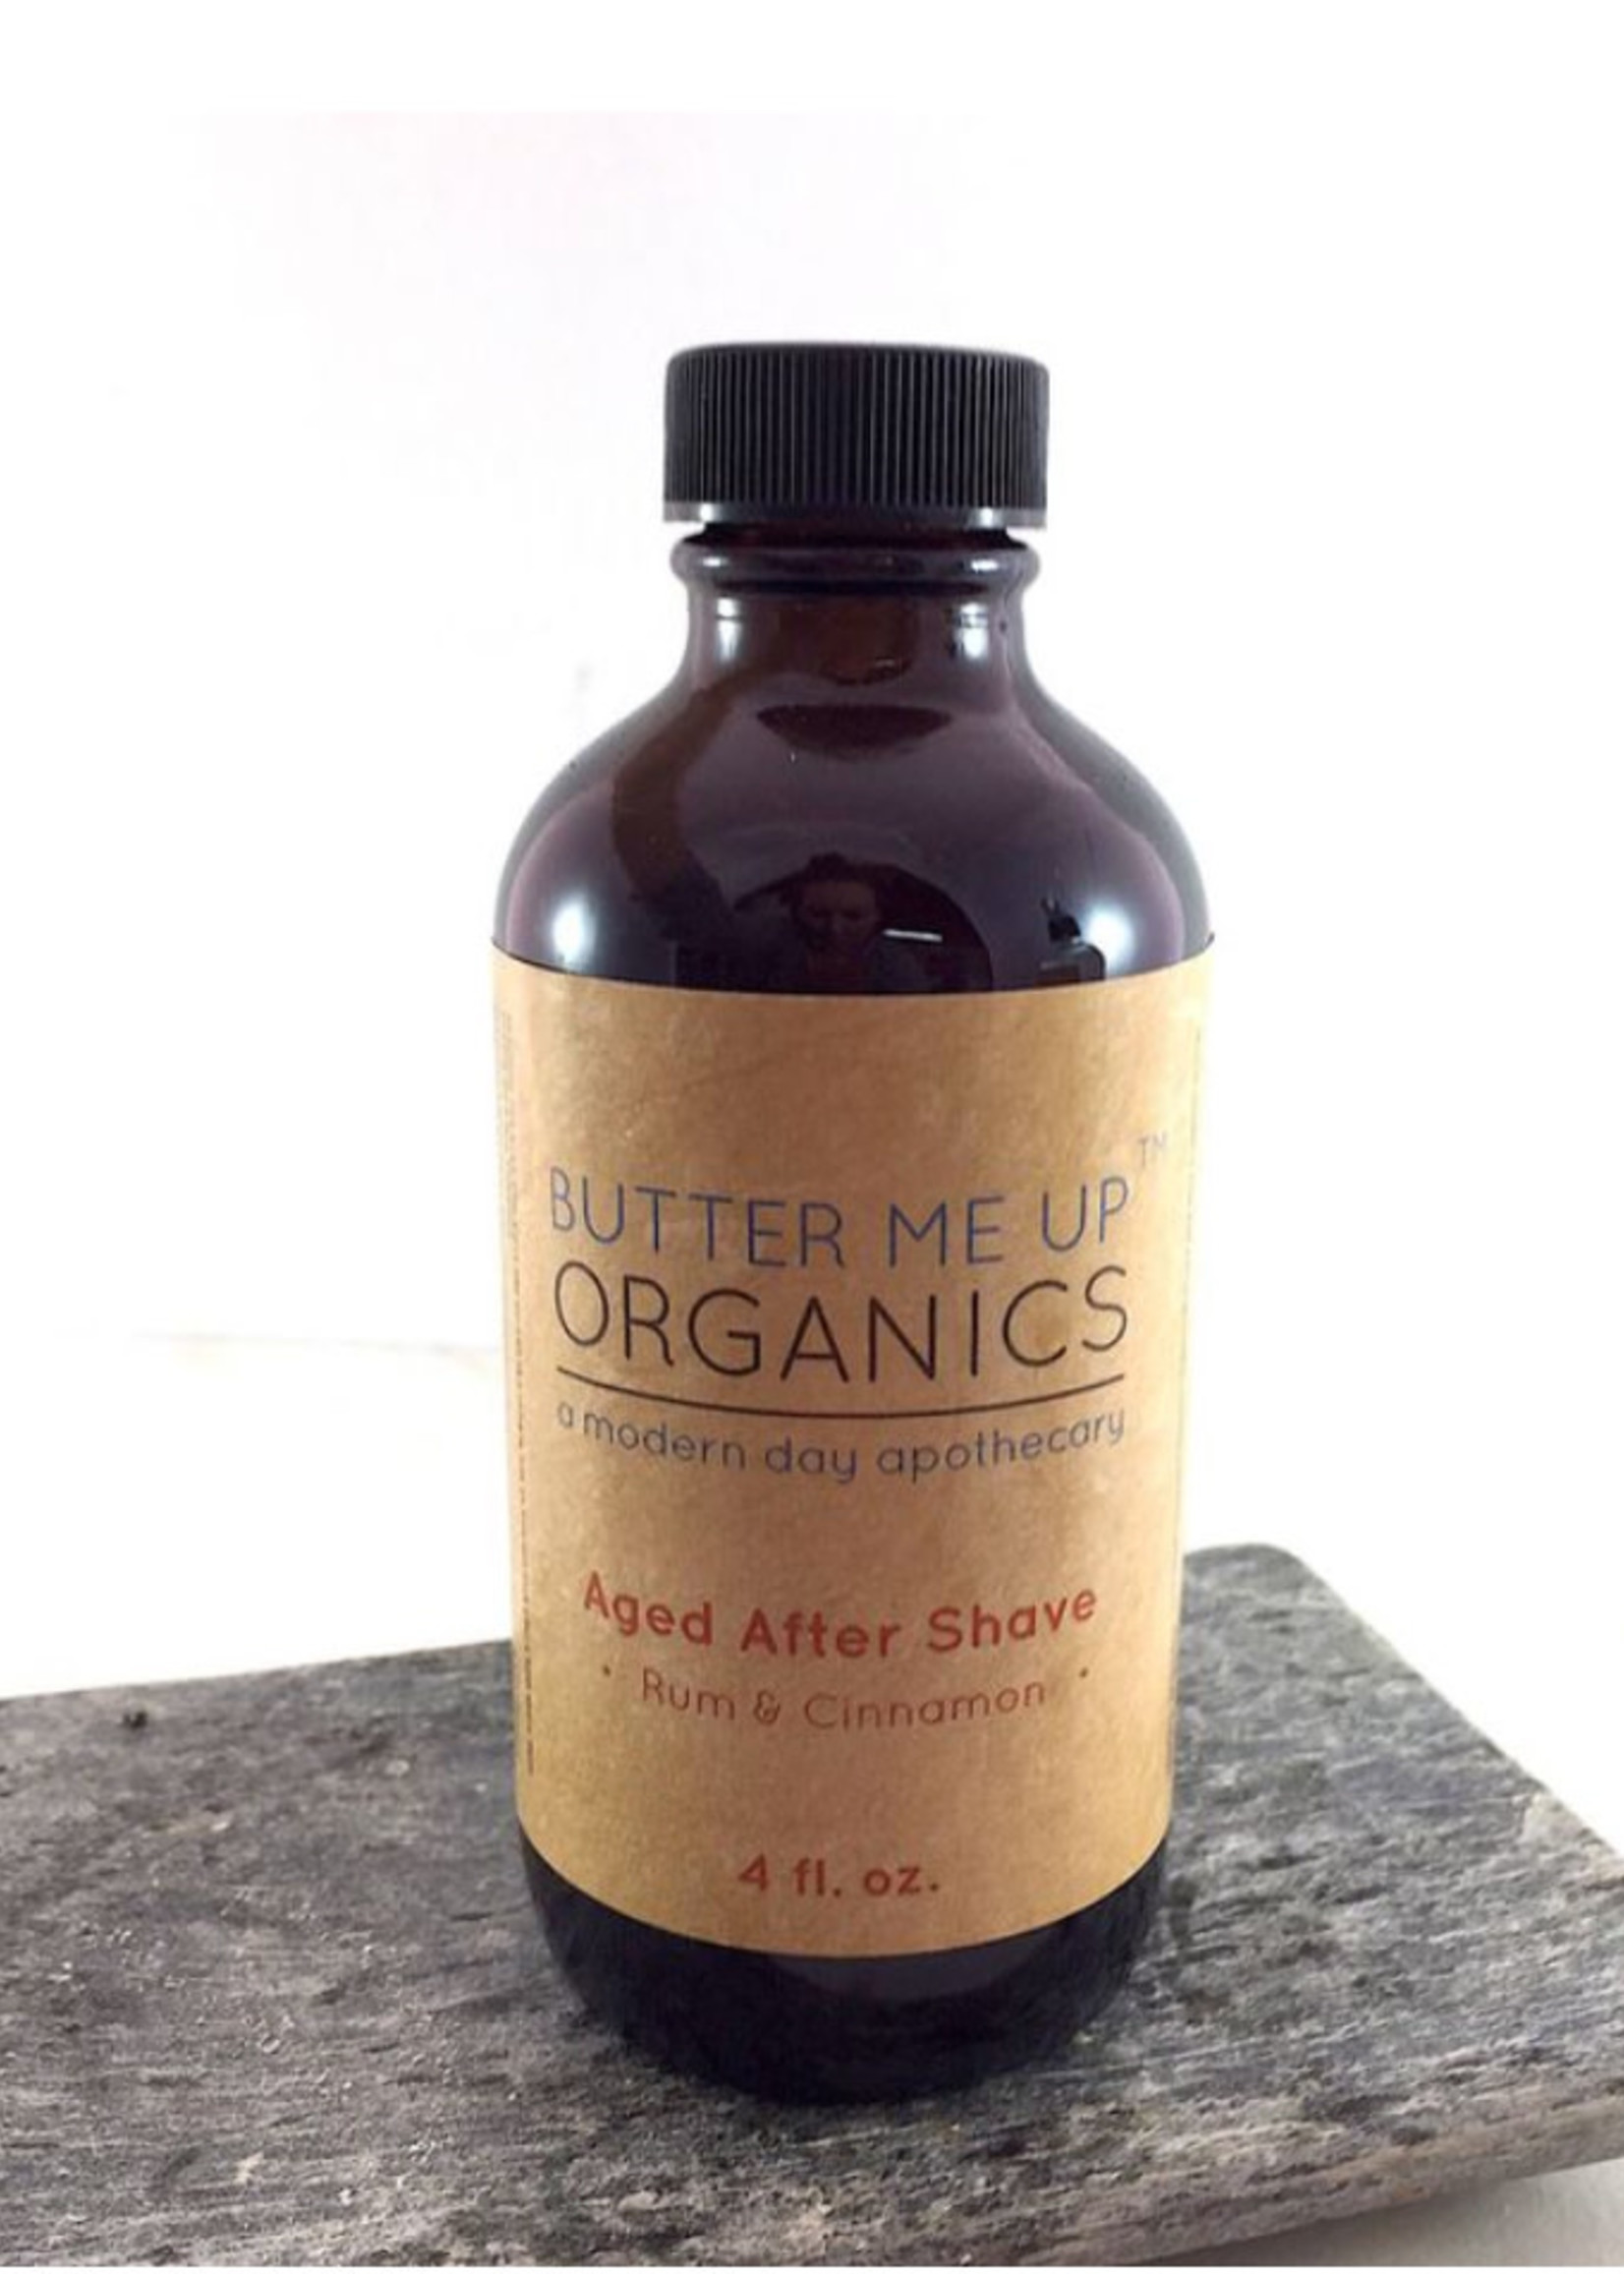 Butter Me Up Aged After Shave